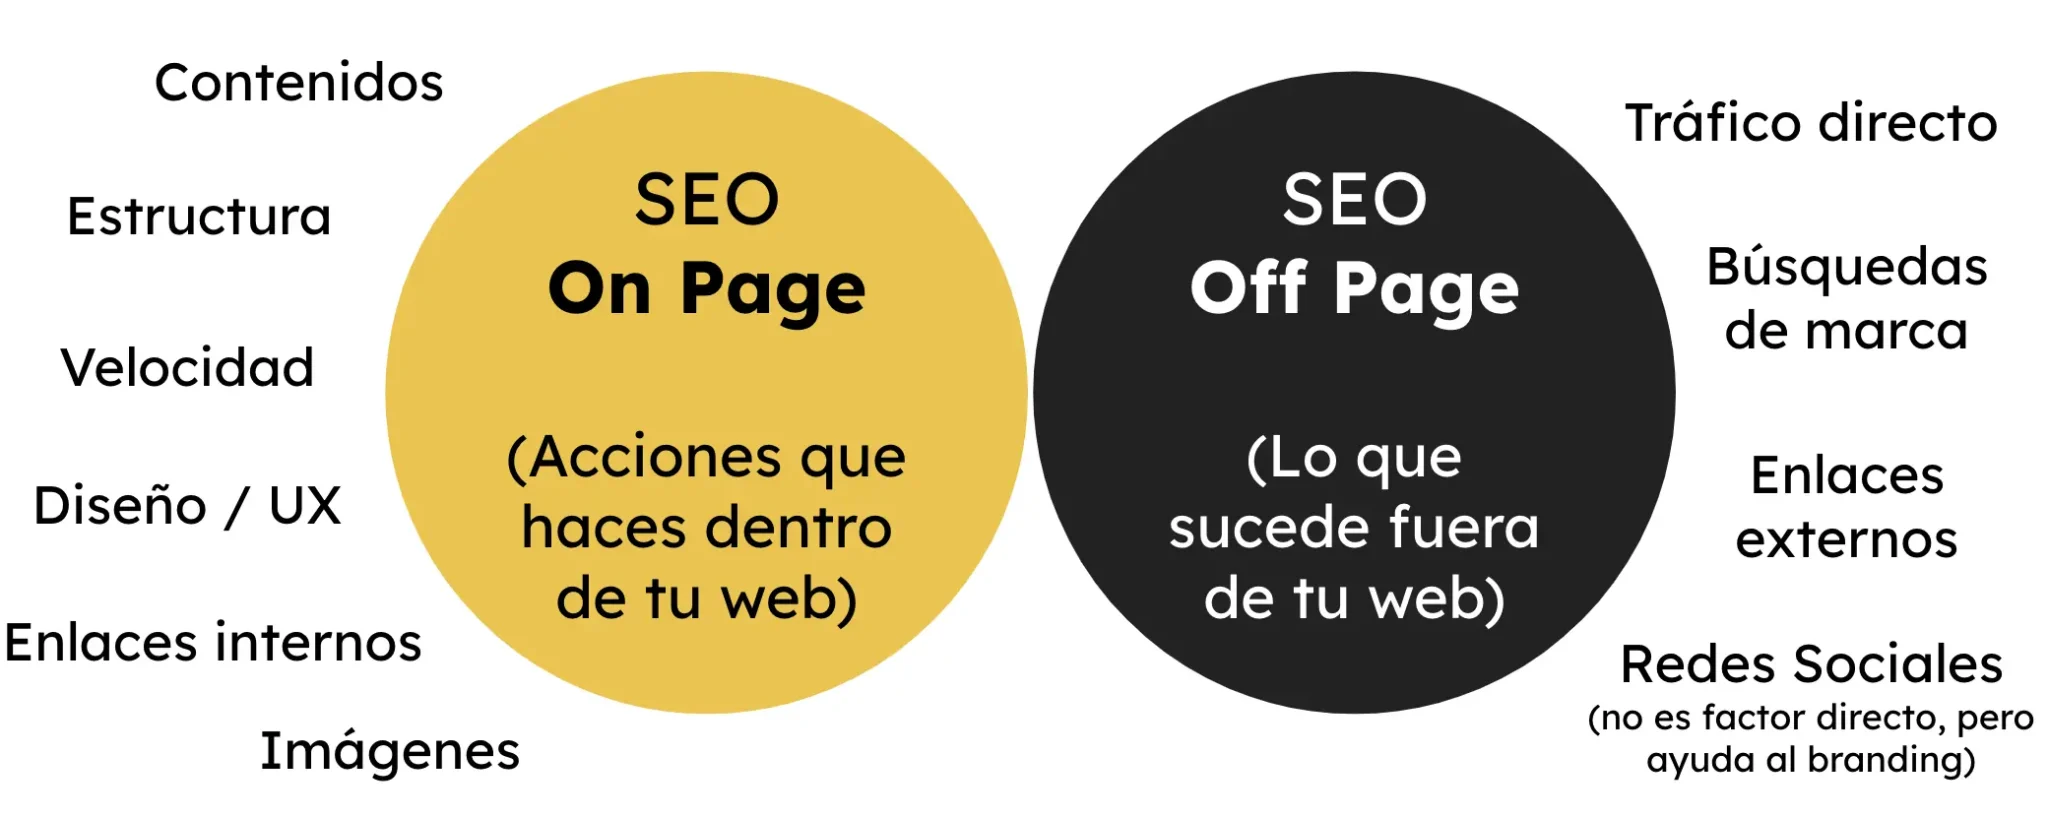 SEO On Page y Off Page